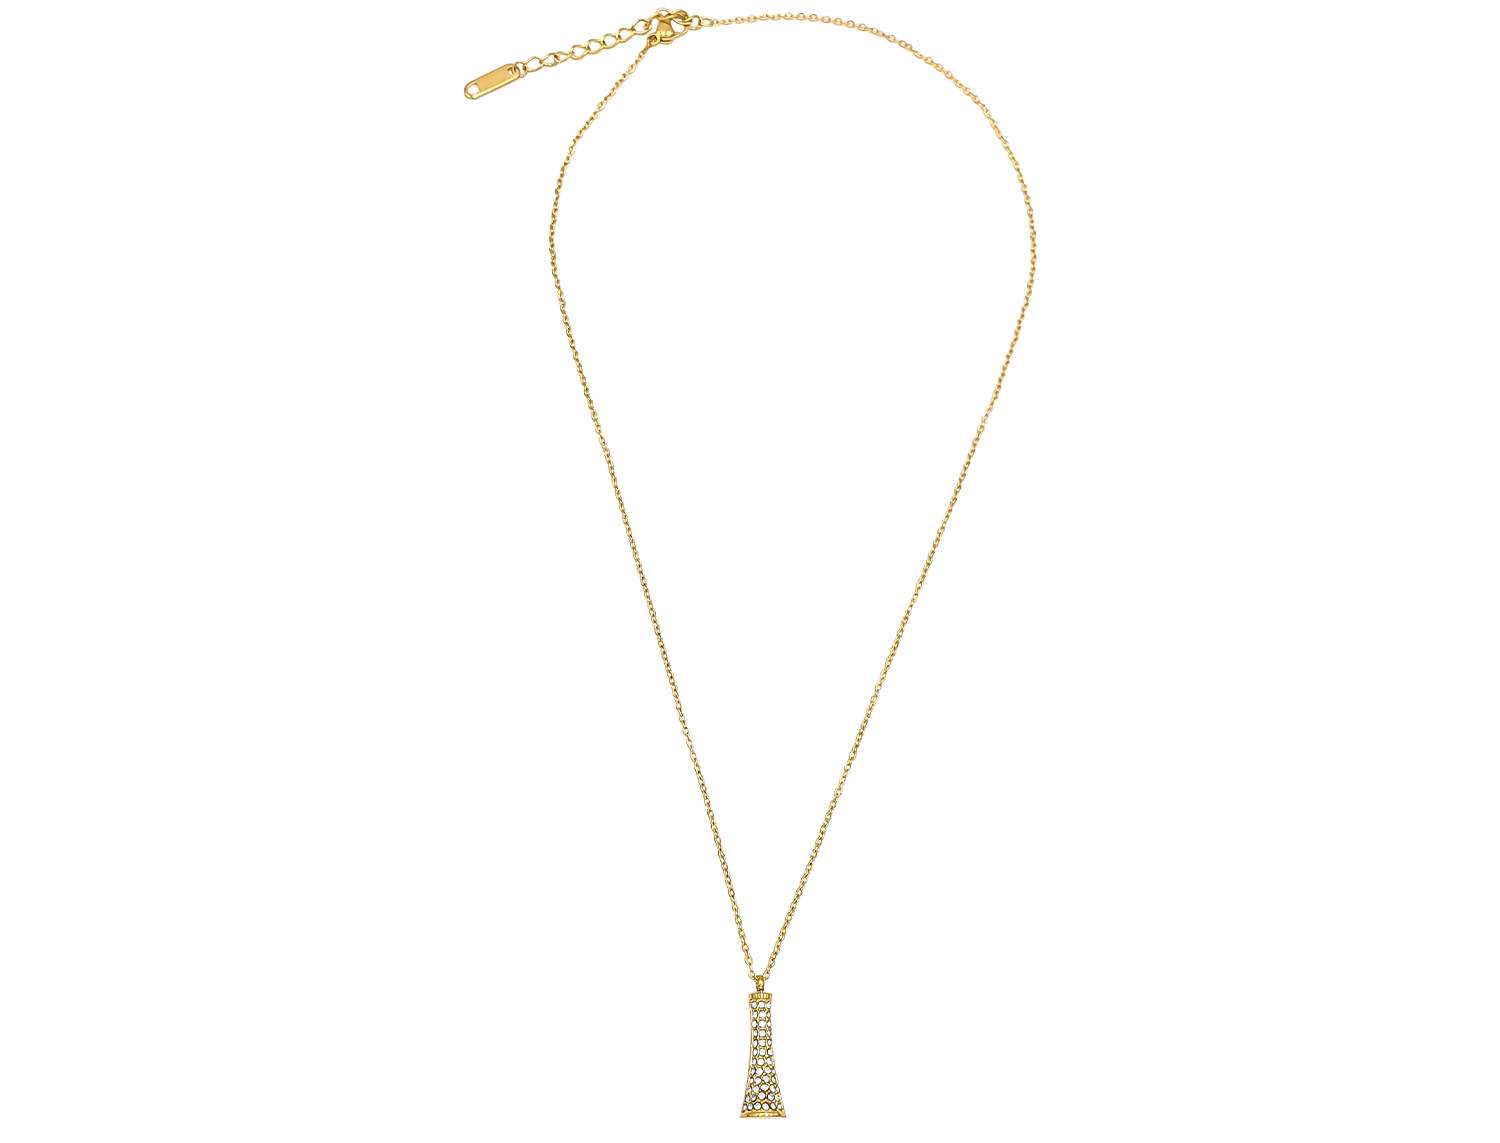 Sparkling Dimond Drop Necklace Gold Plated - Adema